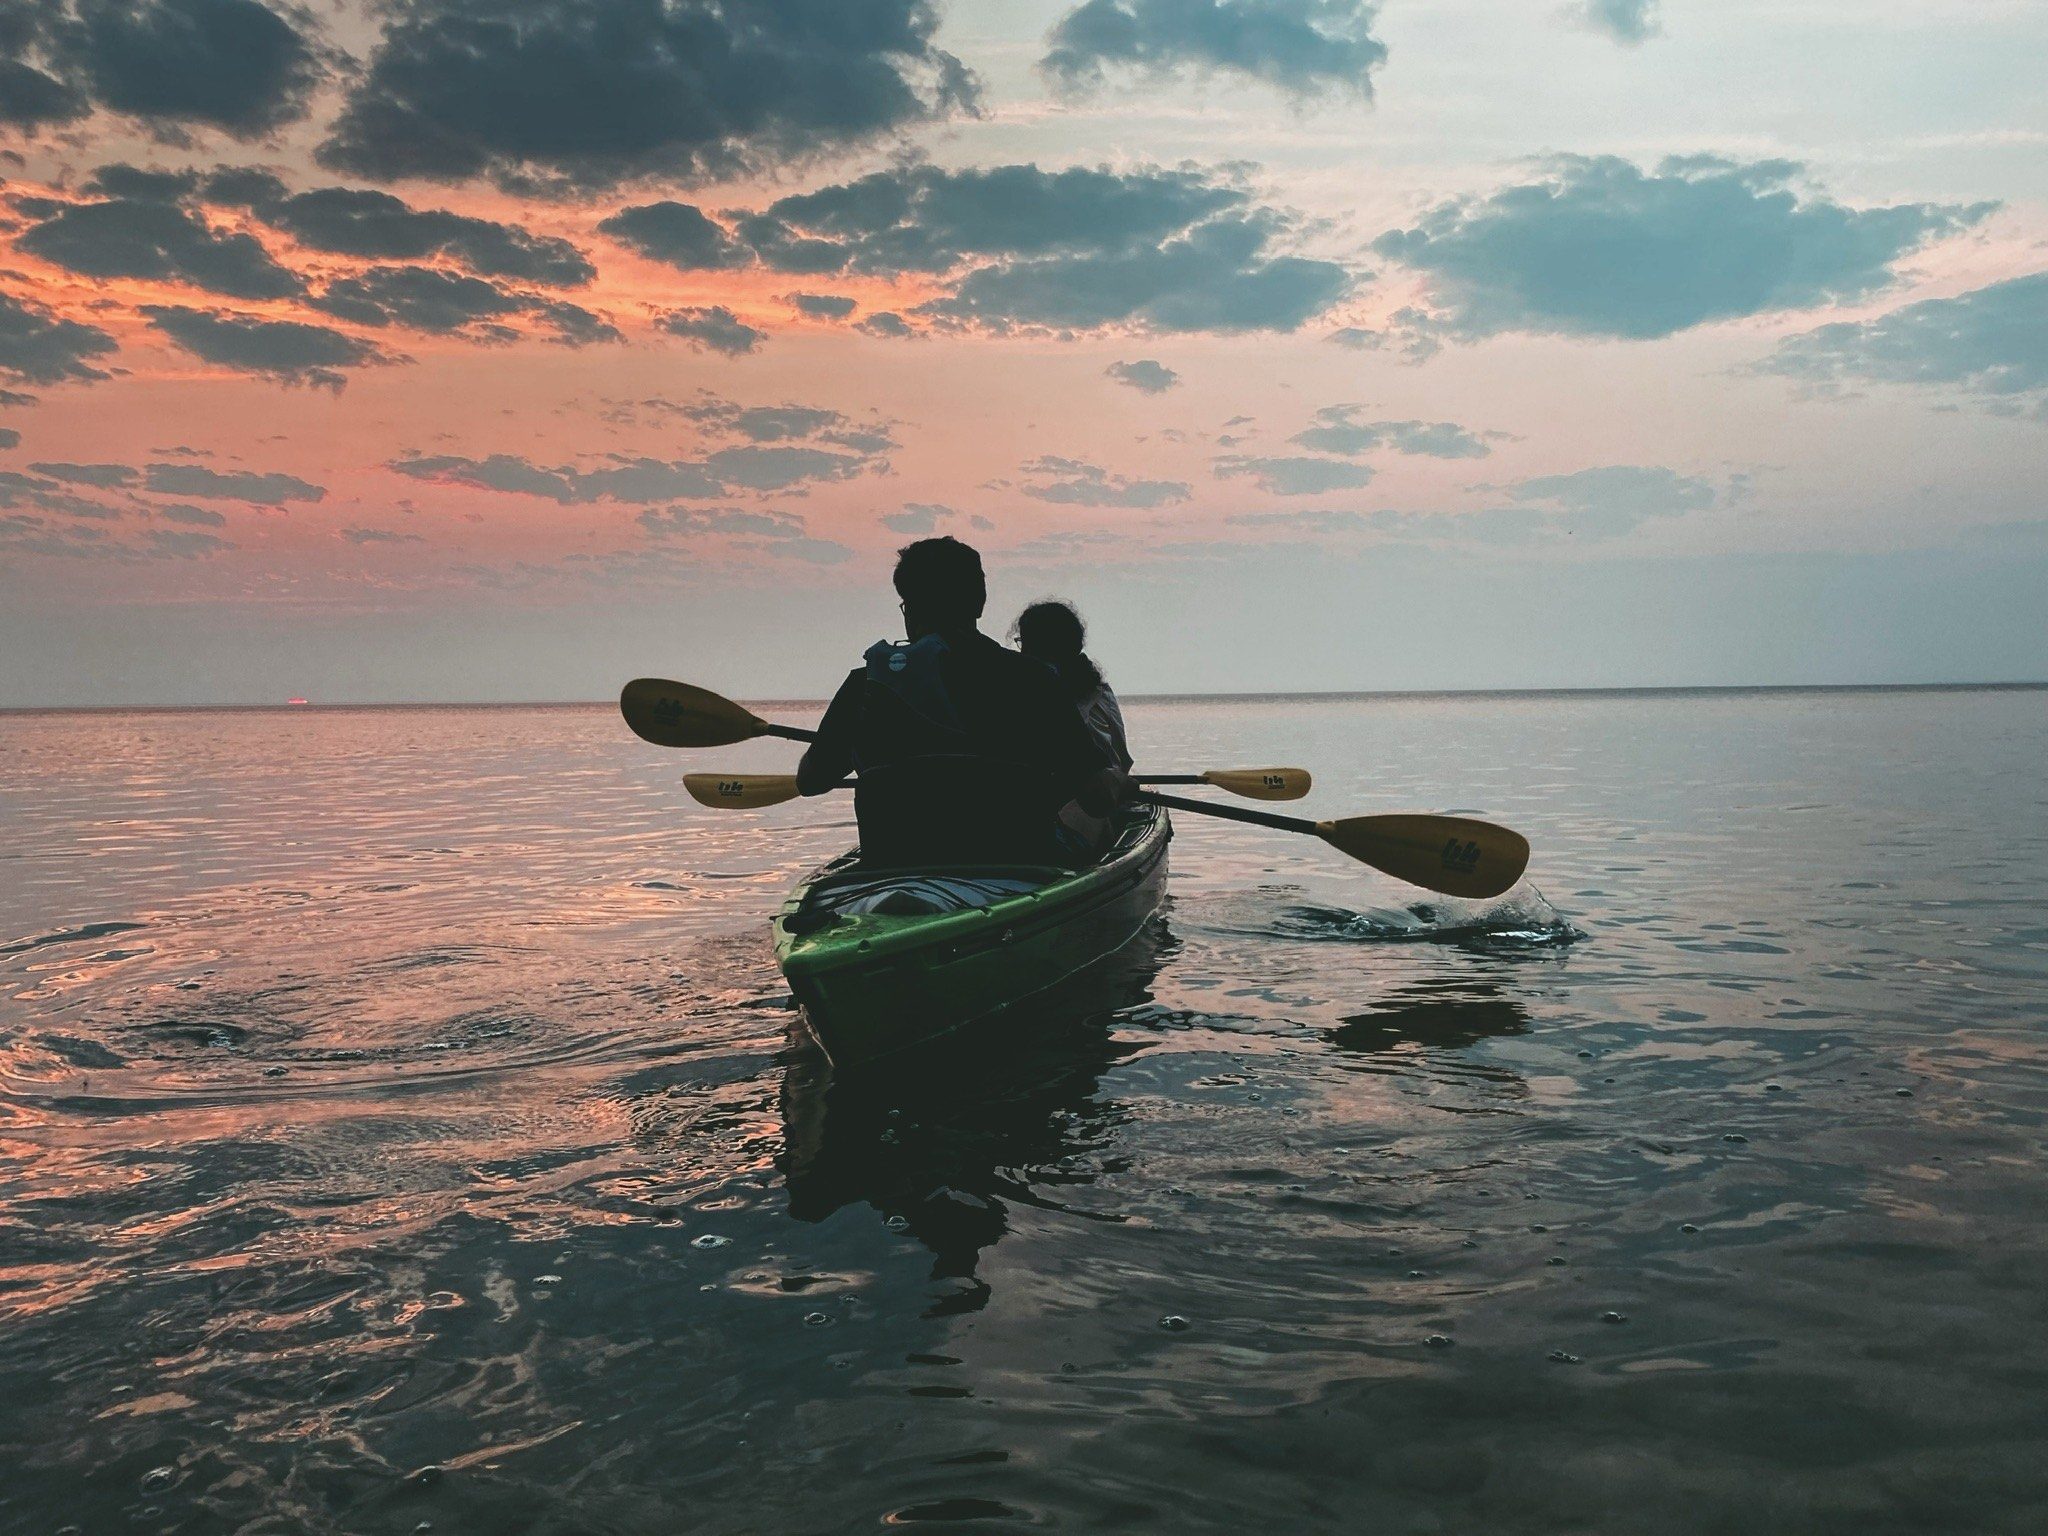 Guided kayak tours from Mackinac Island include options for overnight campaign at nearby Bois Blanc and Round islands.